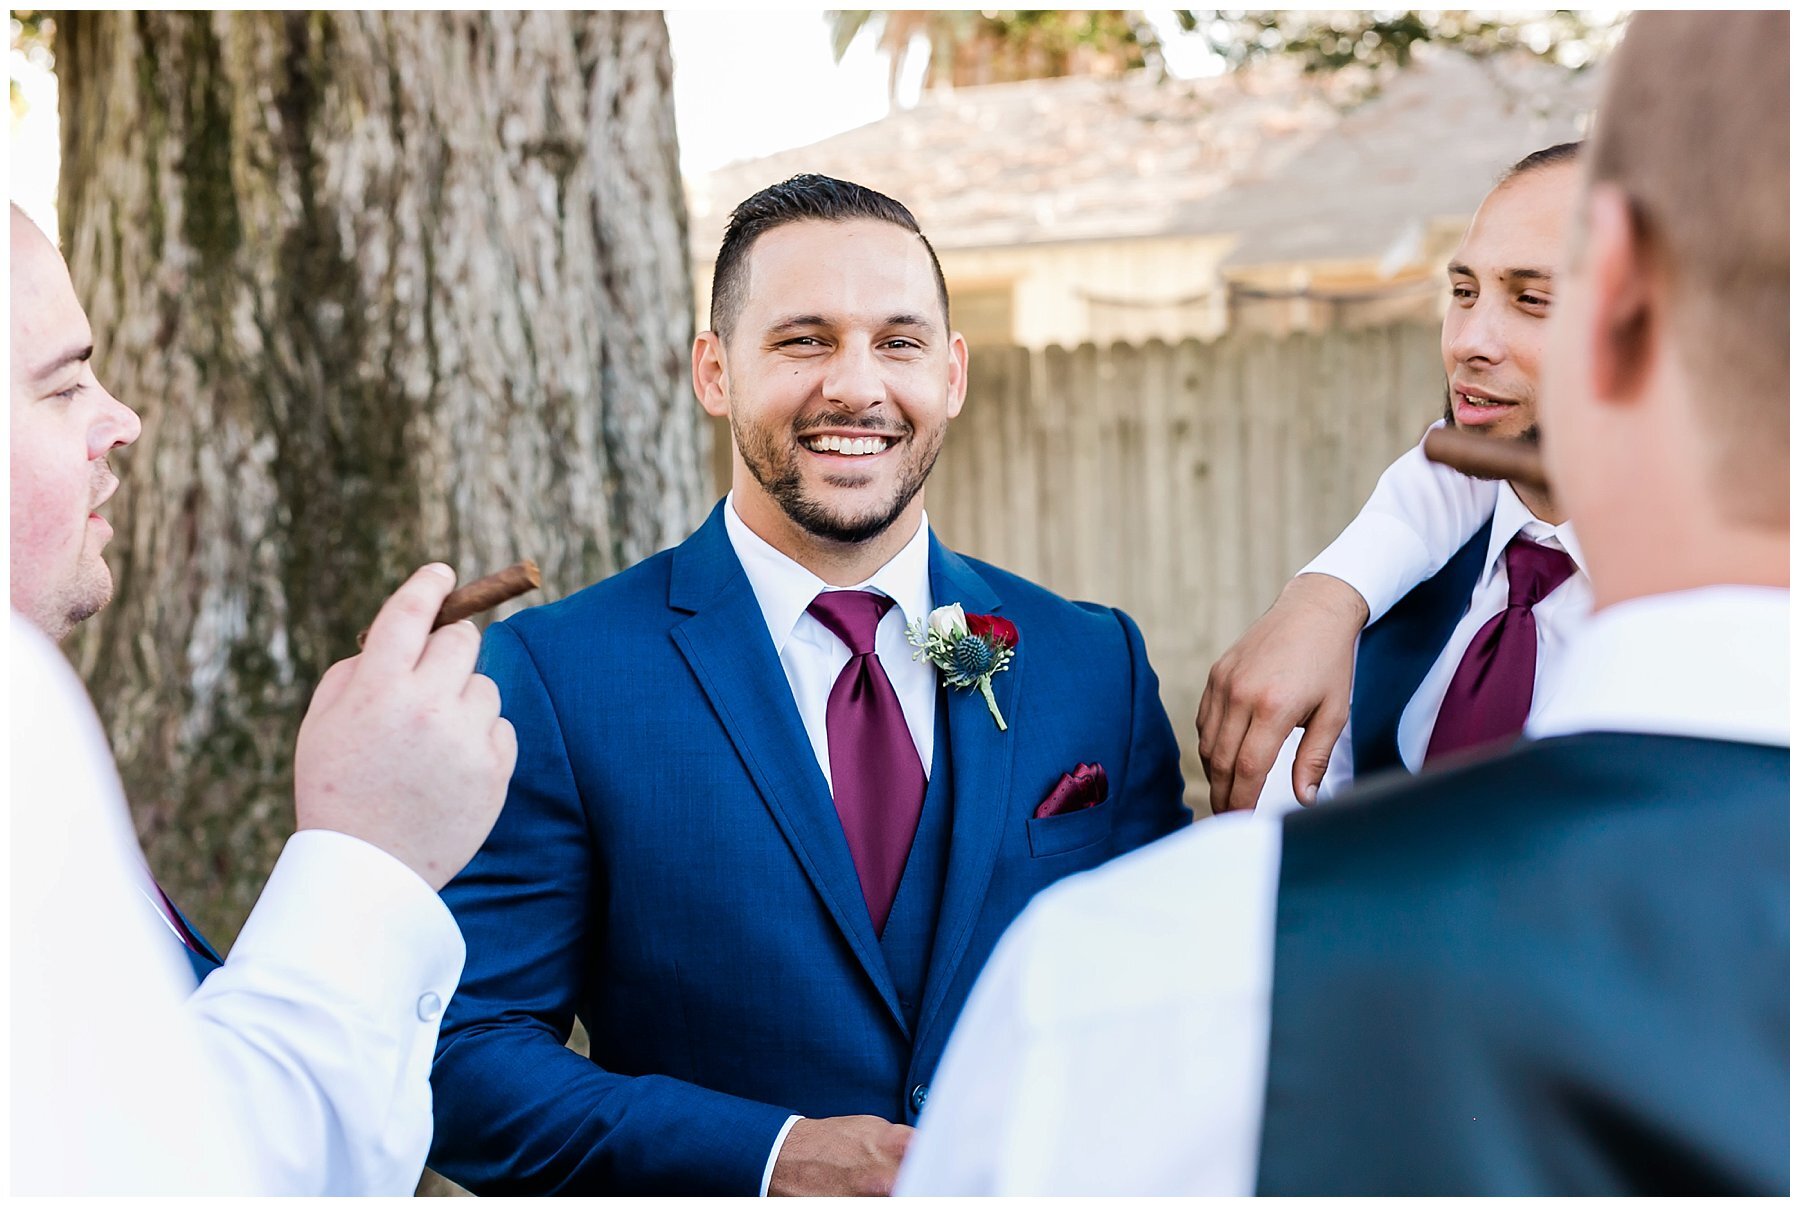  groomsmen in front of the tree and fence 